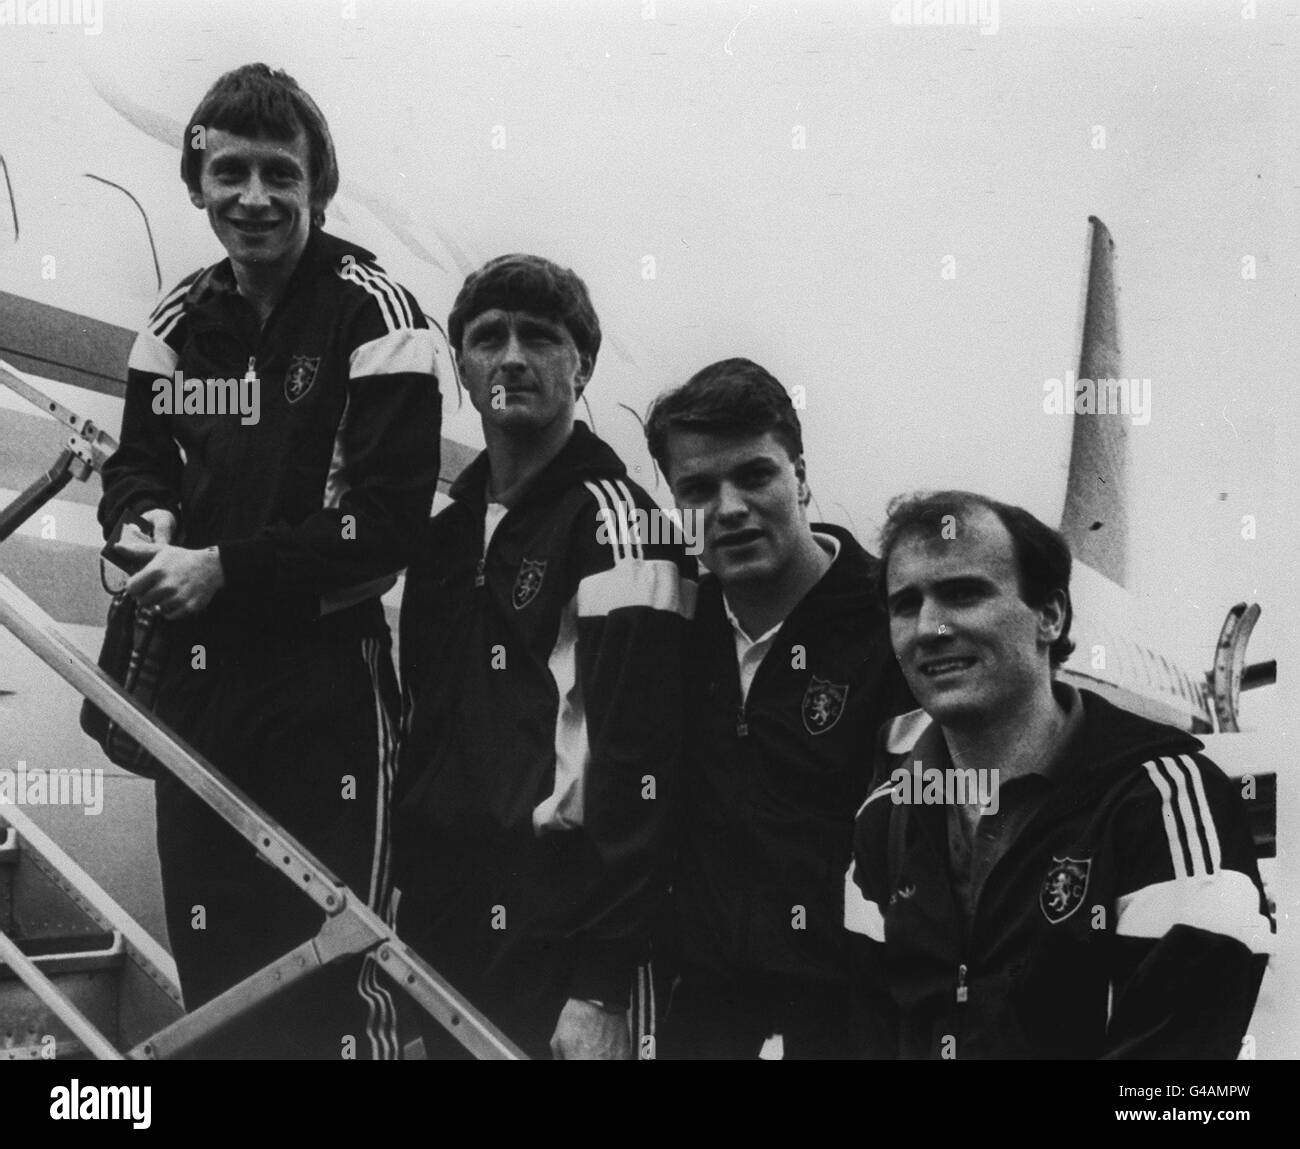 PA NEWS PHOTO 16/3/87  DUNDEE UNITED SOCCER PLAYERS FROM LEFT TO RIGHT: PAUL STURROCK, PAUL HEGARTY, JOHN CLARK AND EAMMON BANNON LEAVE GLASGOW AIRPORT FOR WEDNESDAY'S UEFA CUP QUARTER FINAL MATCH AGAINST BARCELONA. Stock Photo